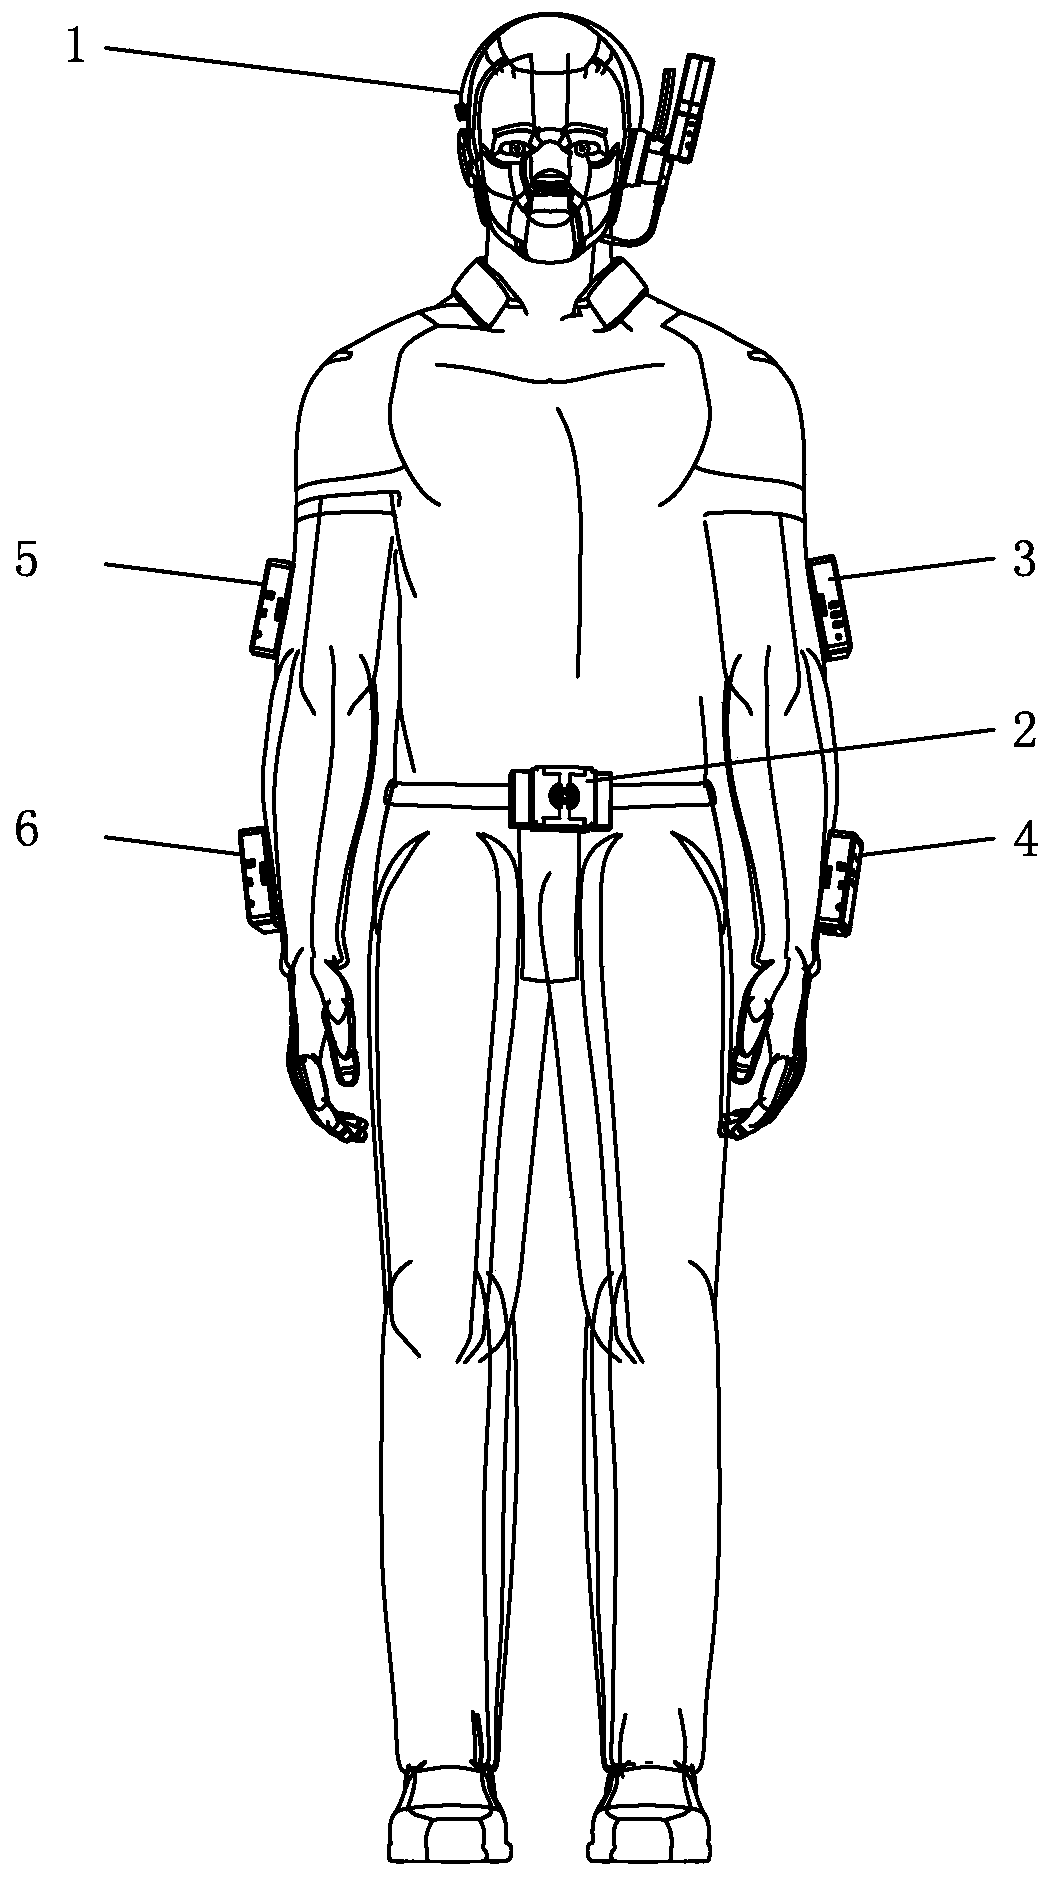 Controller connection system of bionic robot